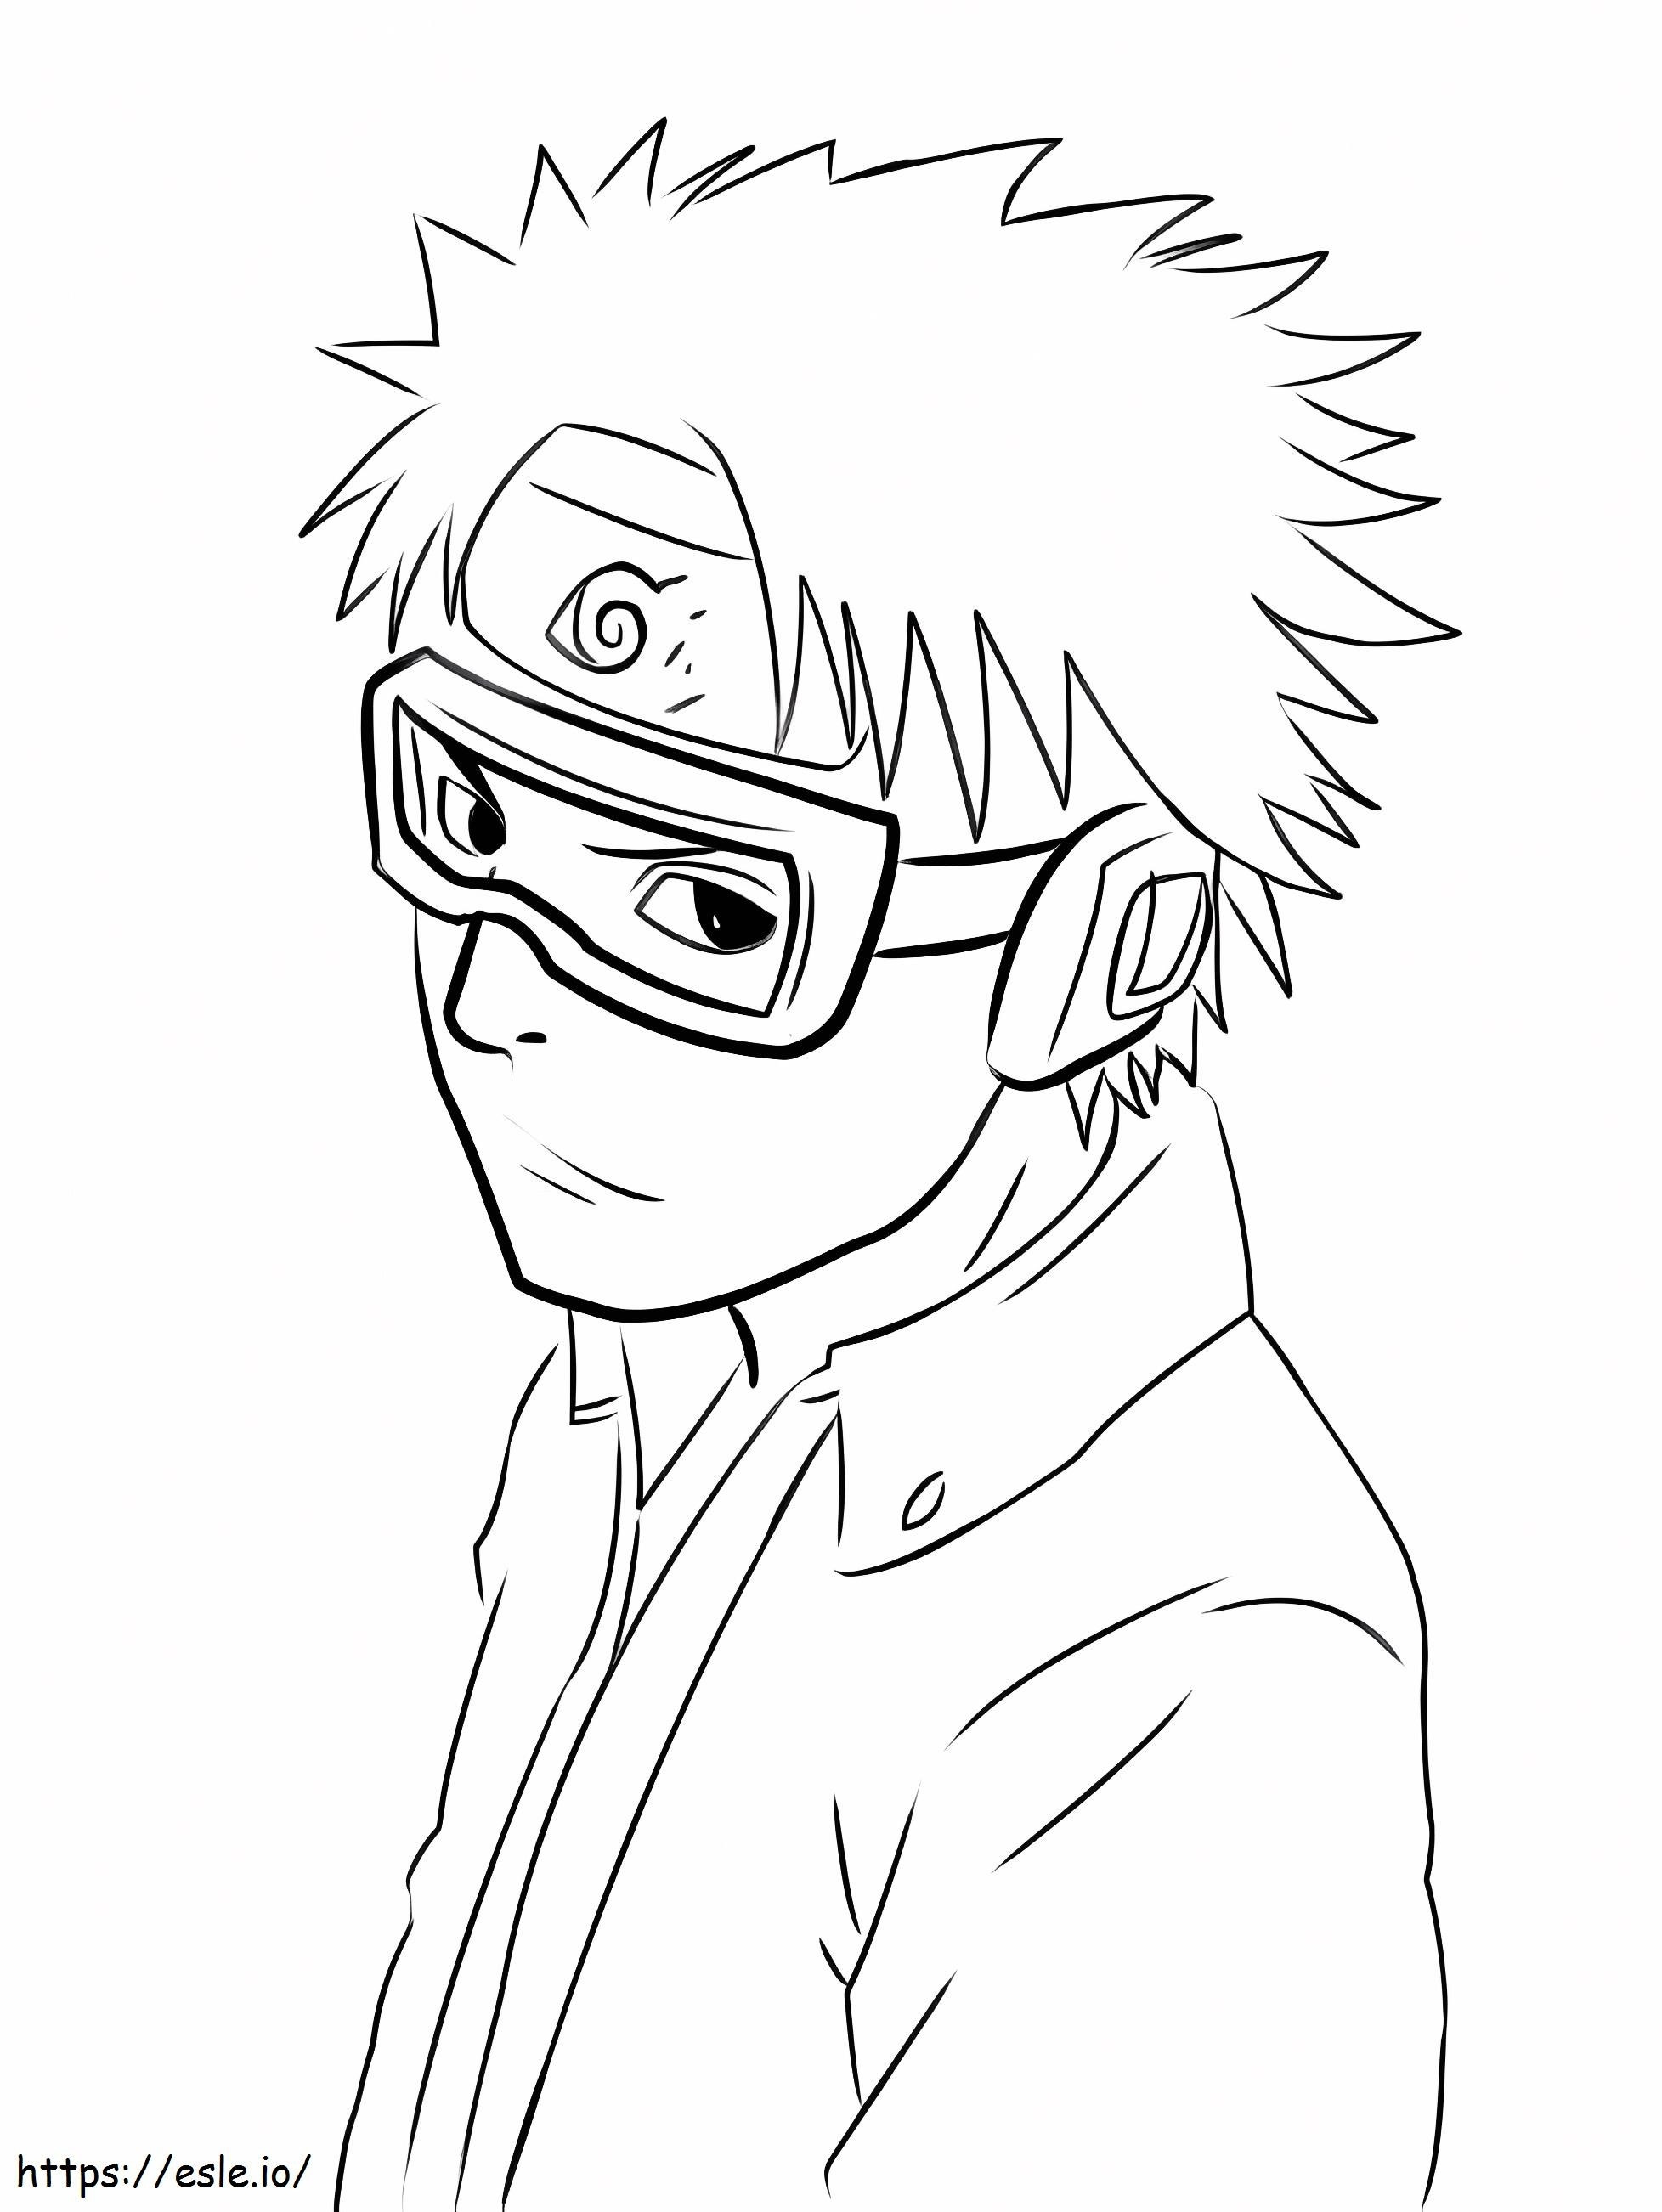 Young Obito coloring page